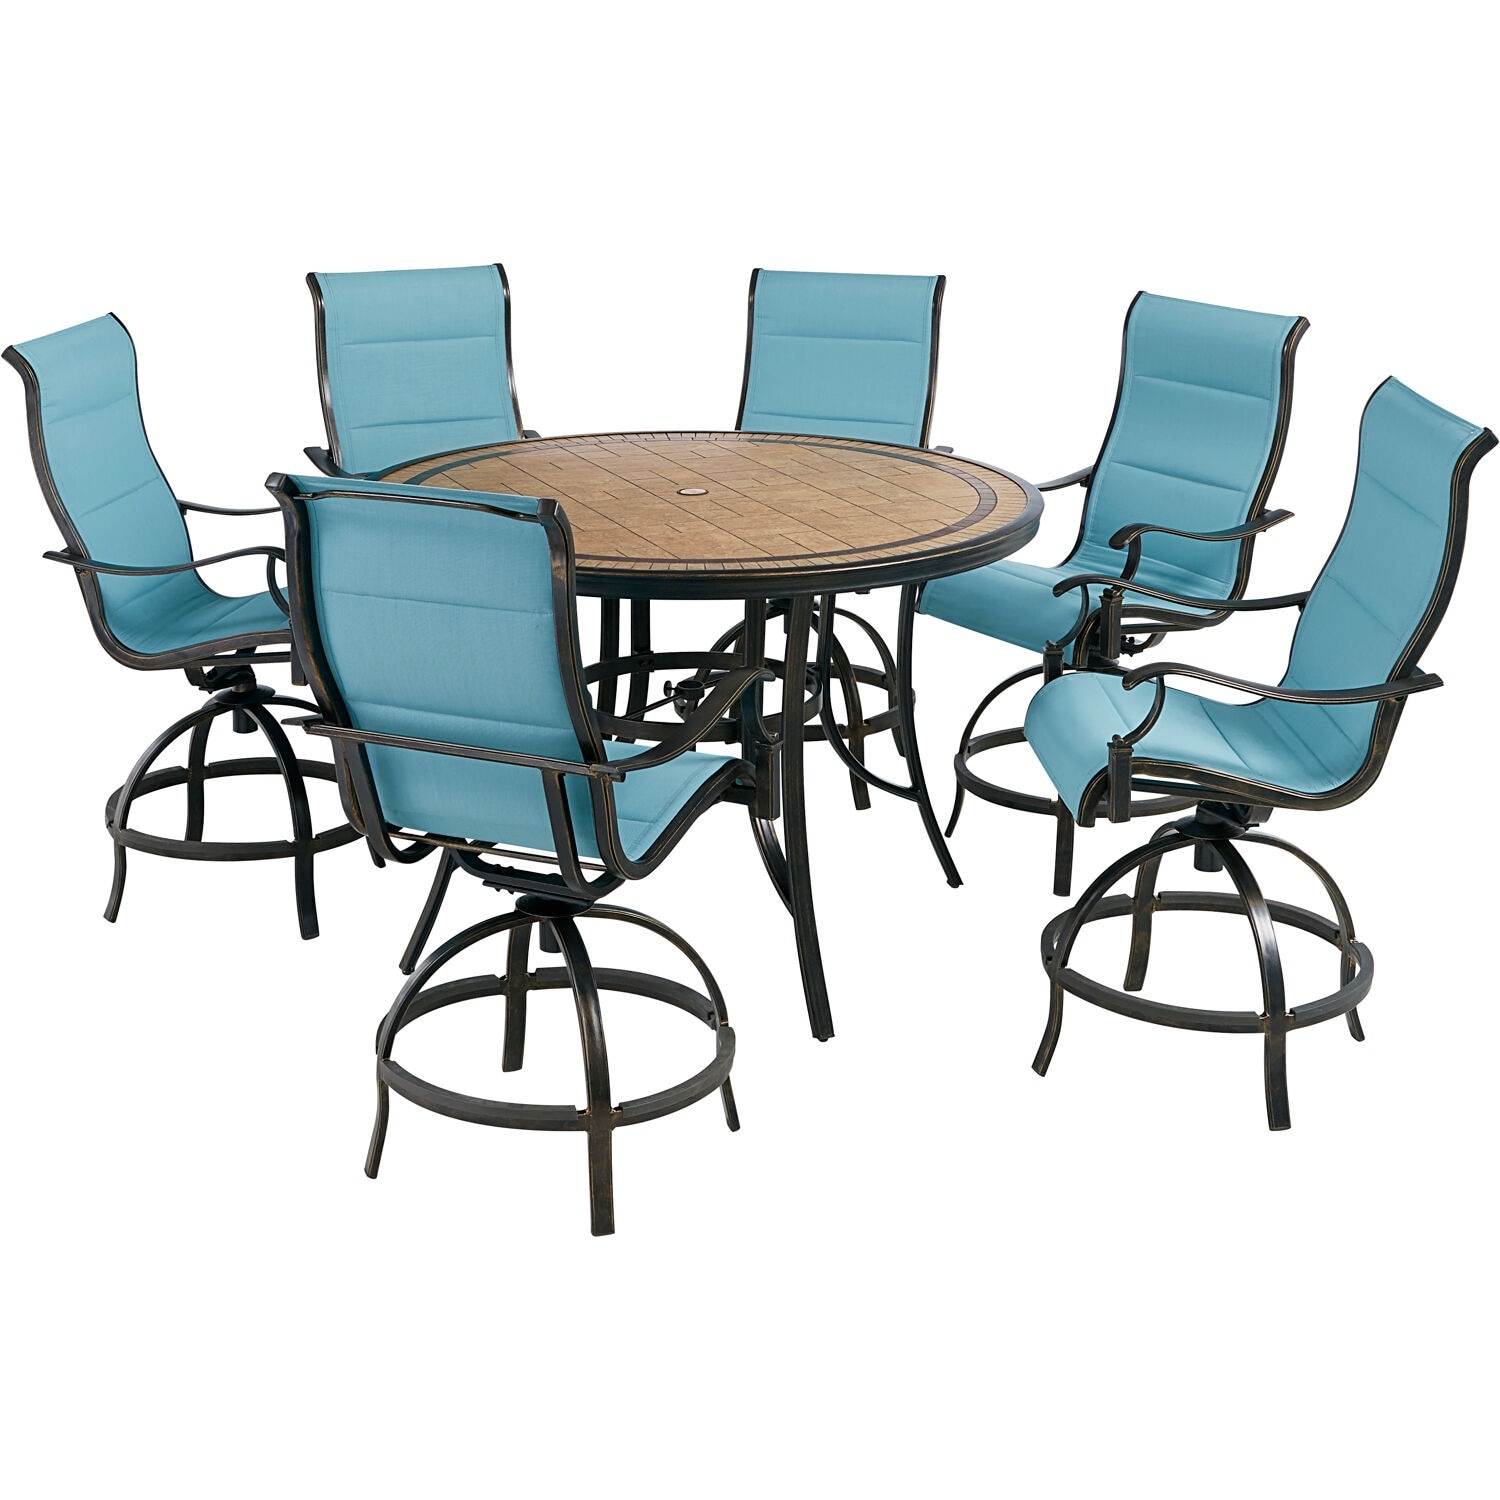 Hanover Monaco 7-piece High-dining Set In Blue With 6 Padded Counter-height Swivel Chairs And A 56-in. Tile-top Table